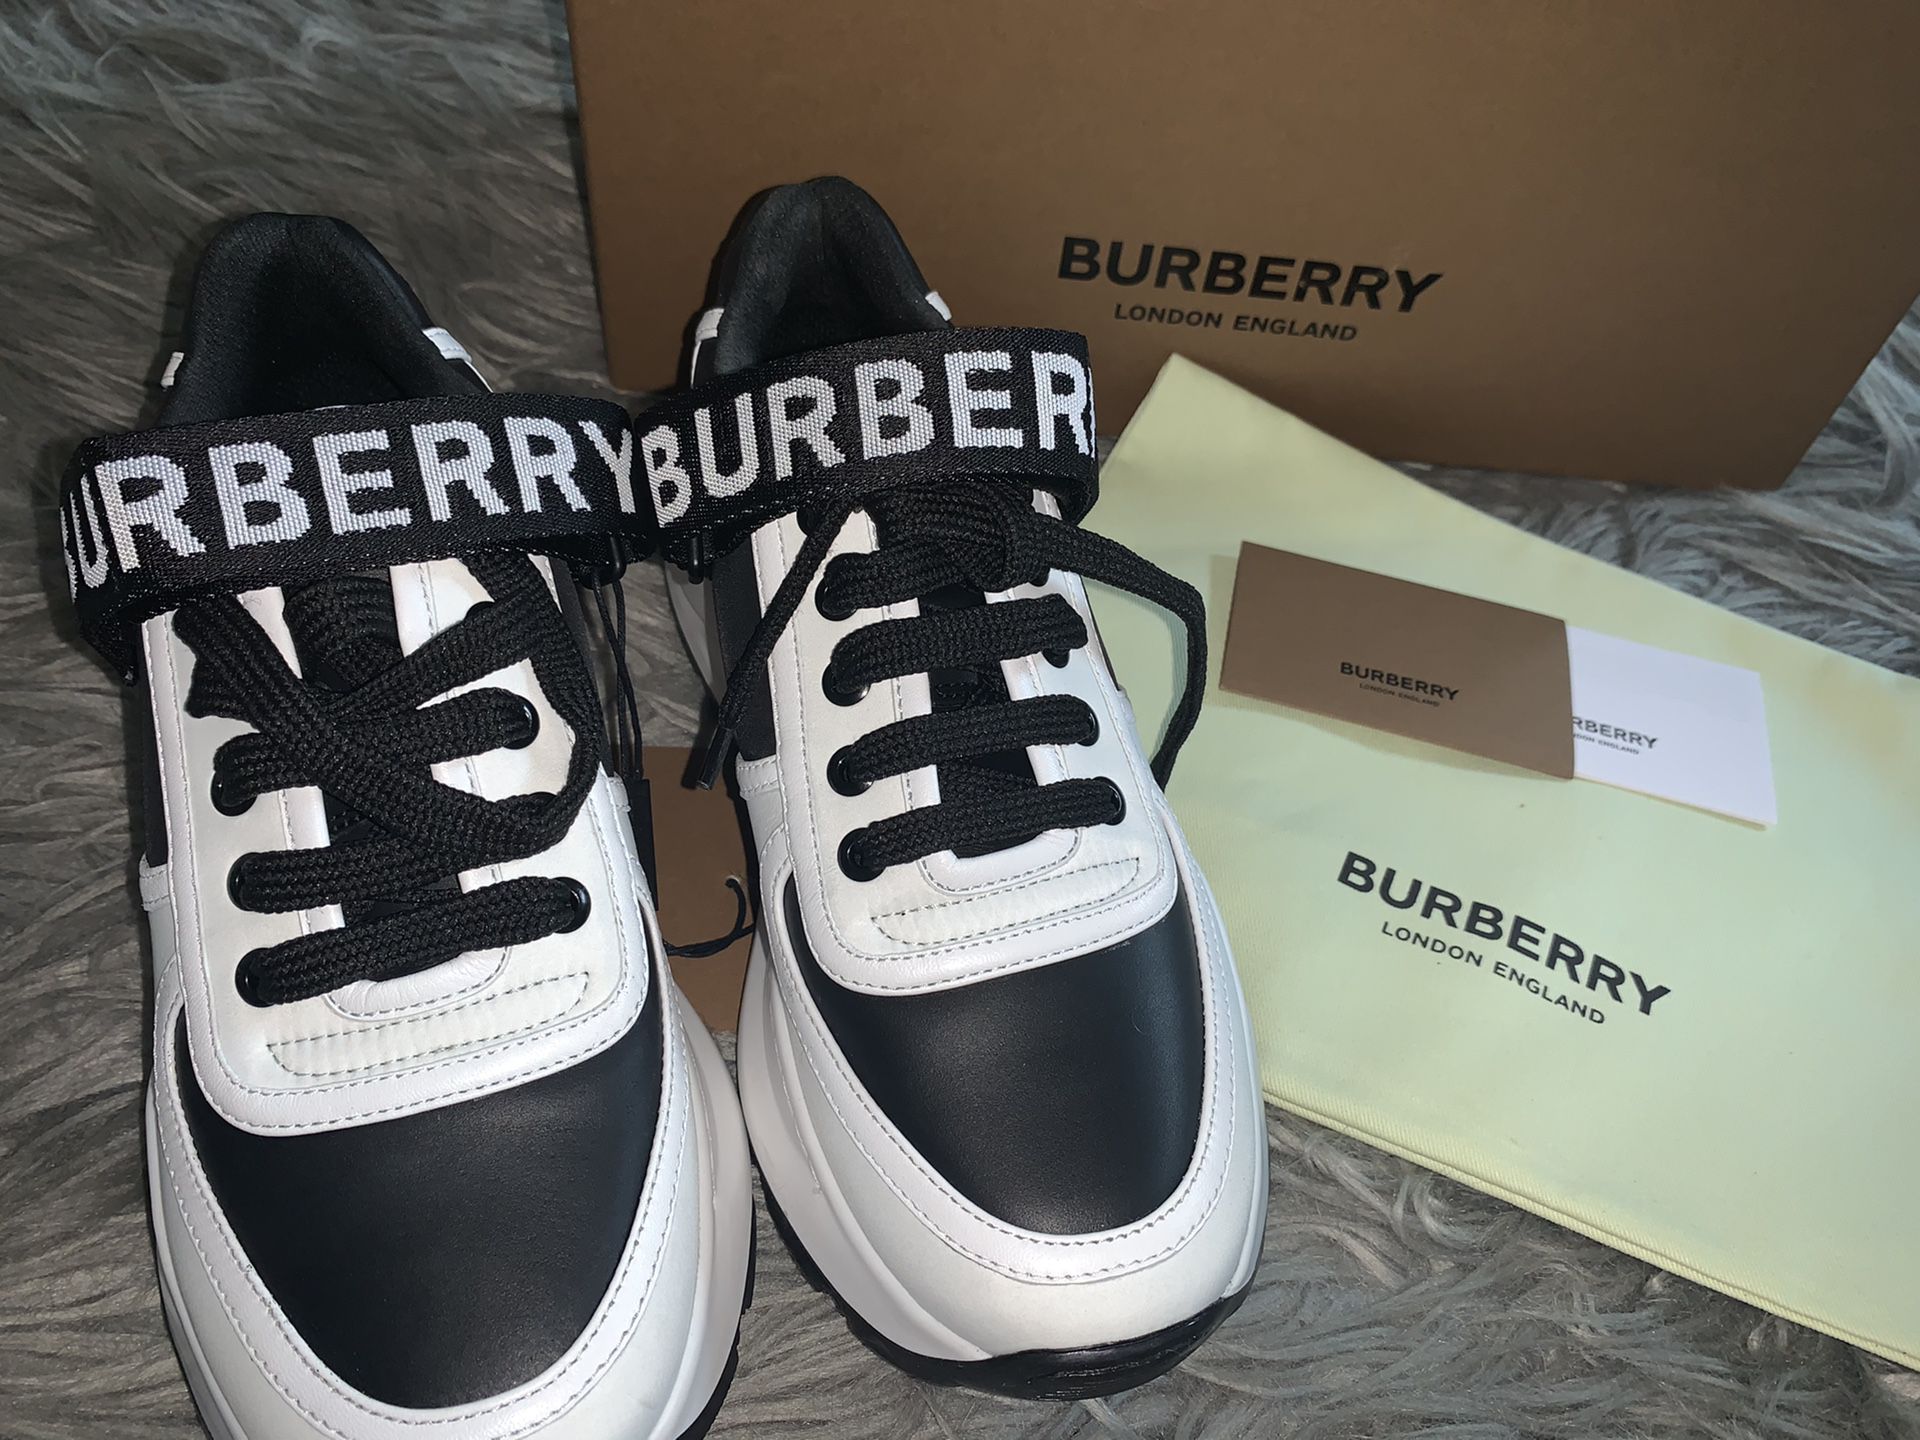 NEW Burberry Woman Sneakers size 6.5